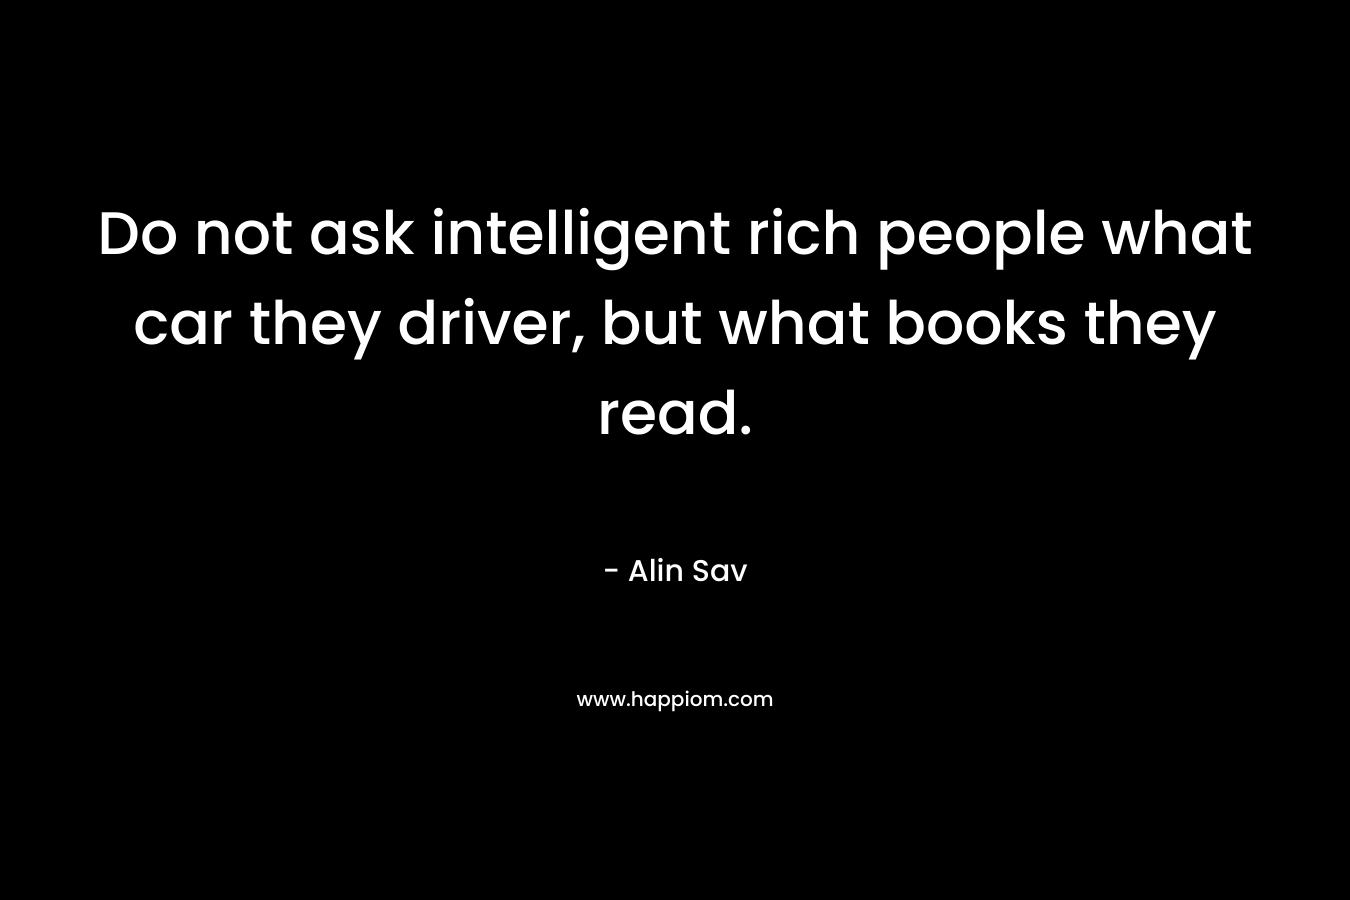 Do not ask intelligent rich people what car they driver, but what books they read.